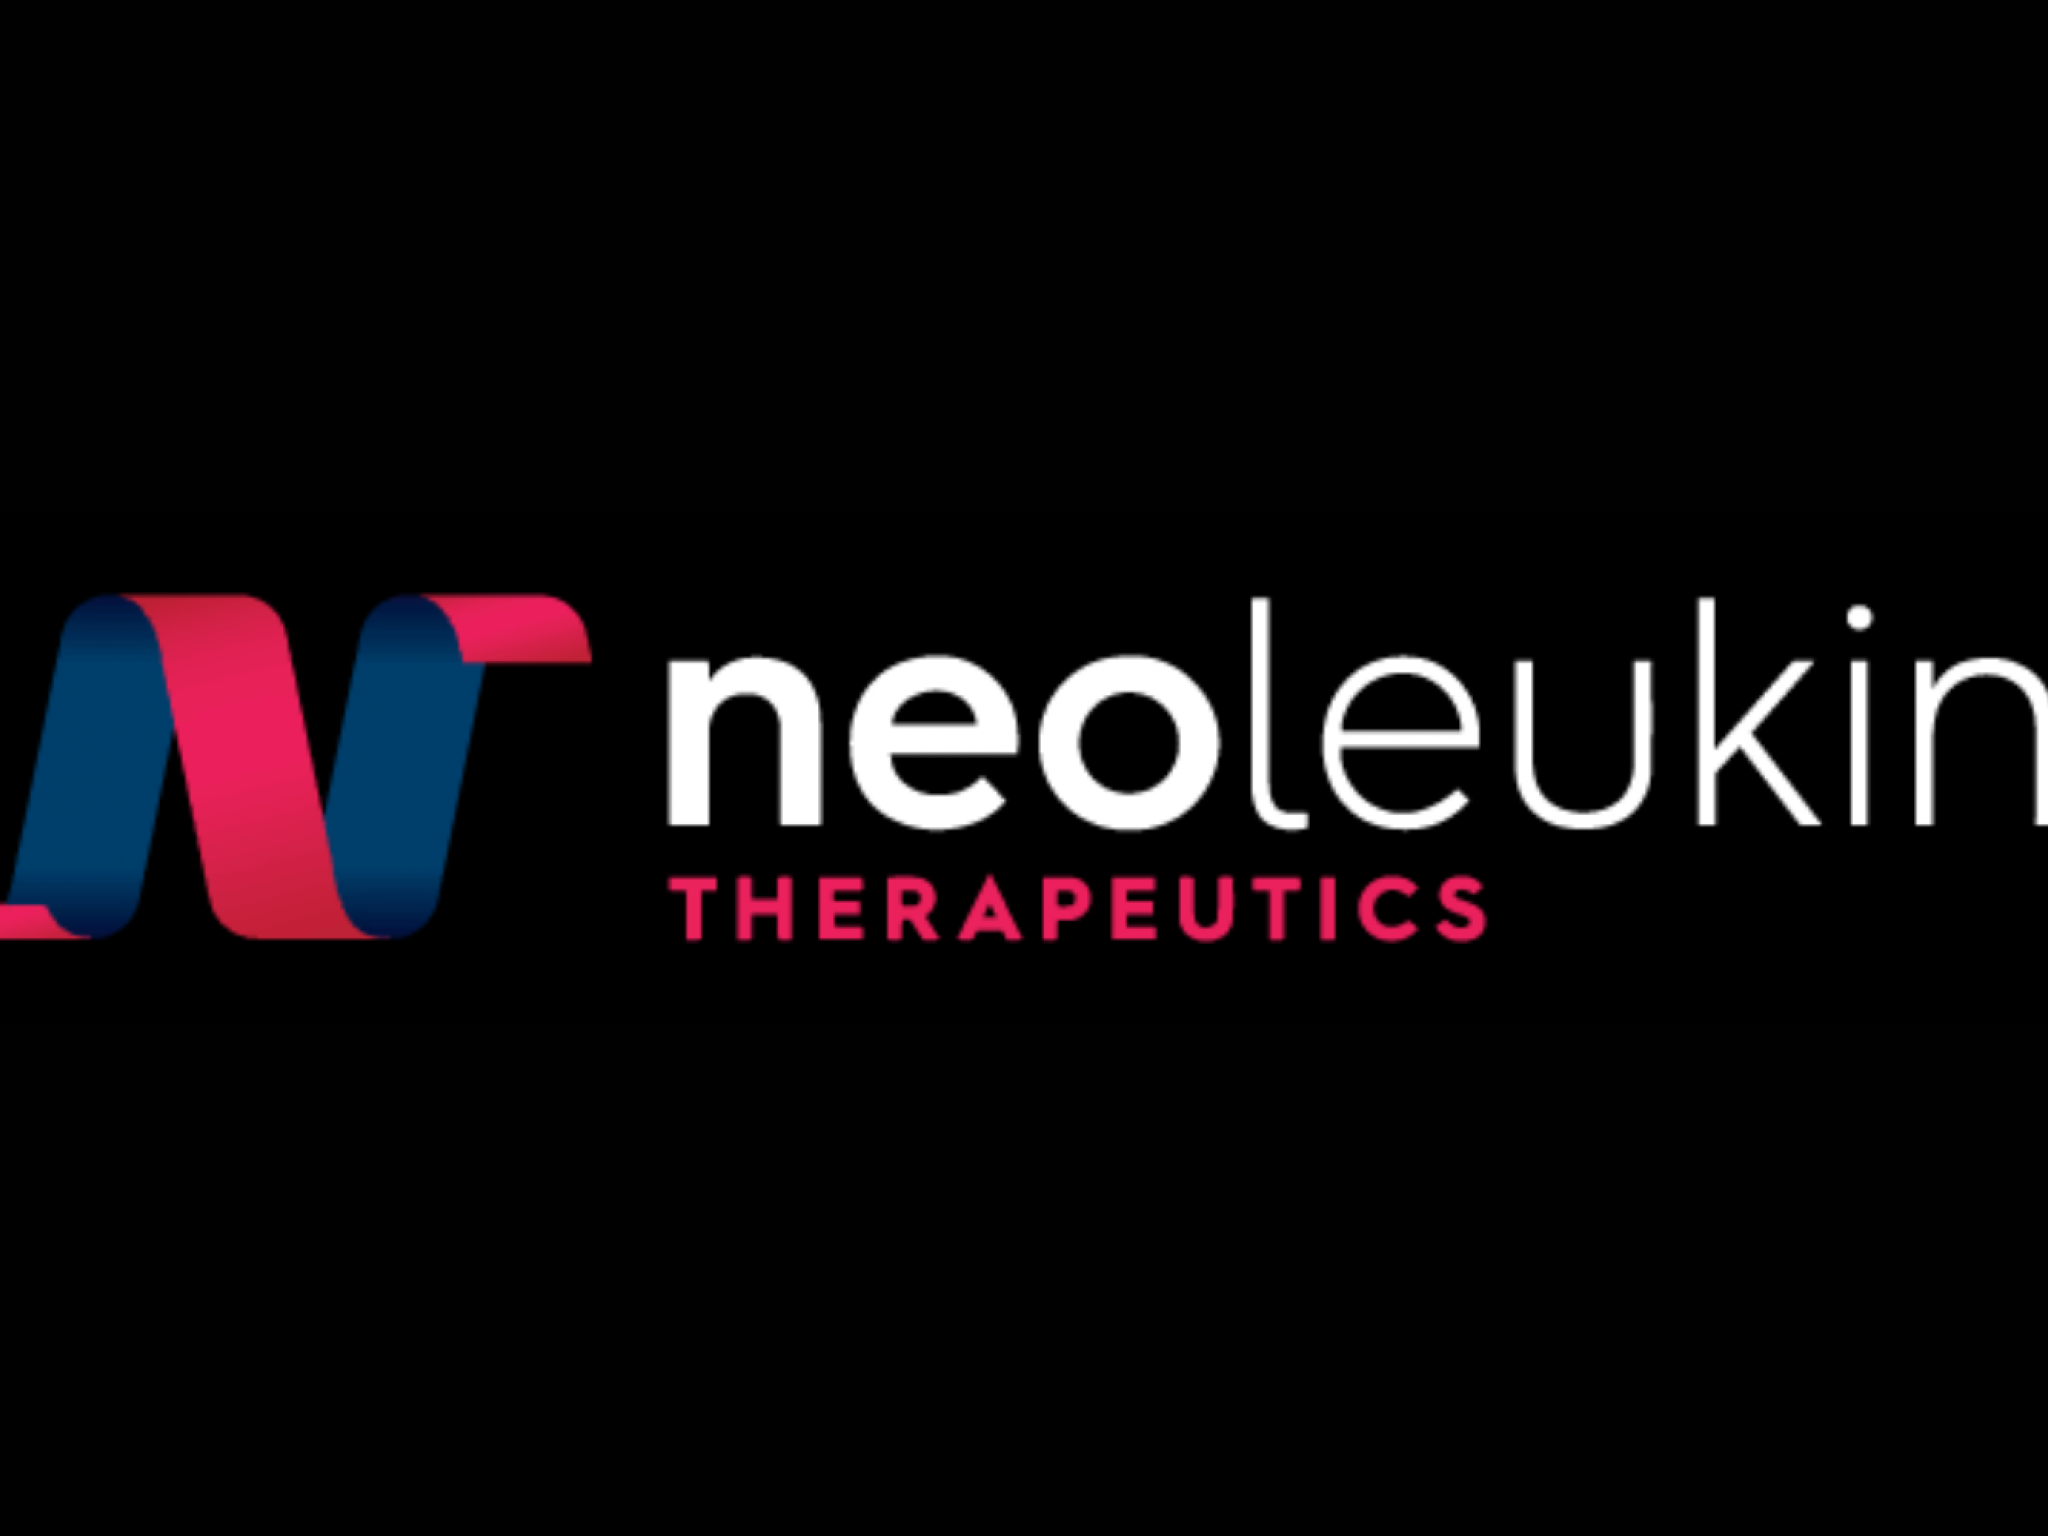  neoleukin-therapeutics-seeks-strategic-alternatives-to-layoff-more-in-round-2-within-6-months 